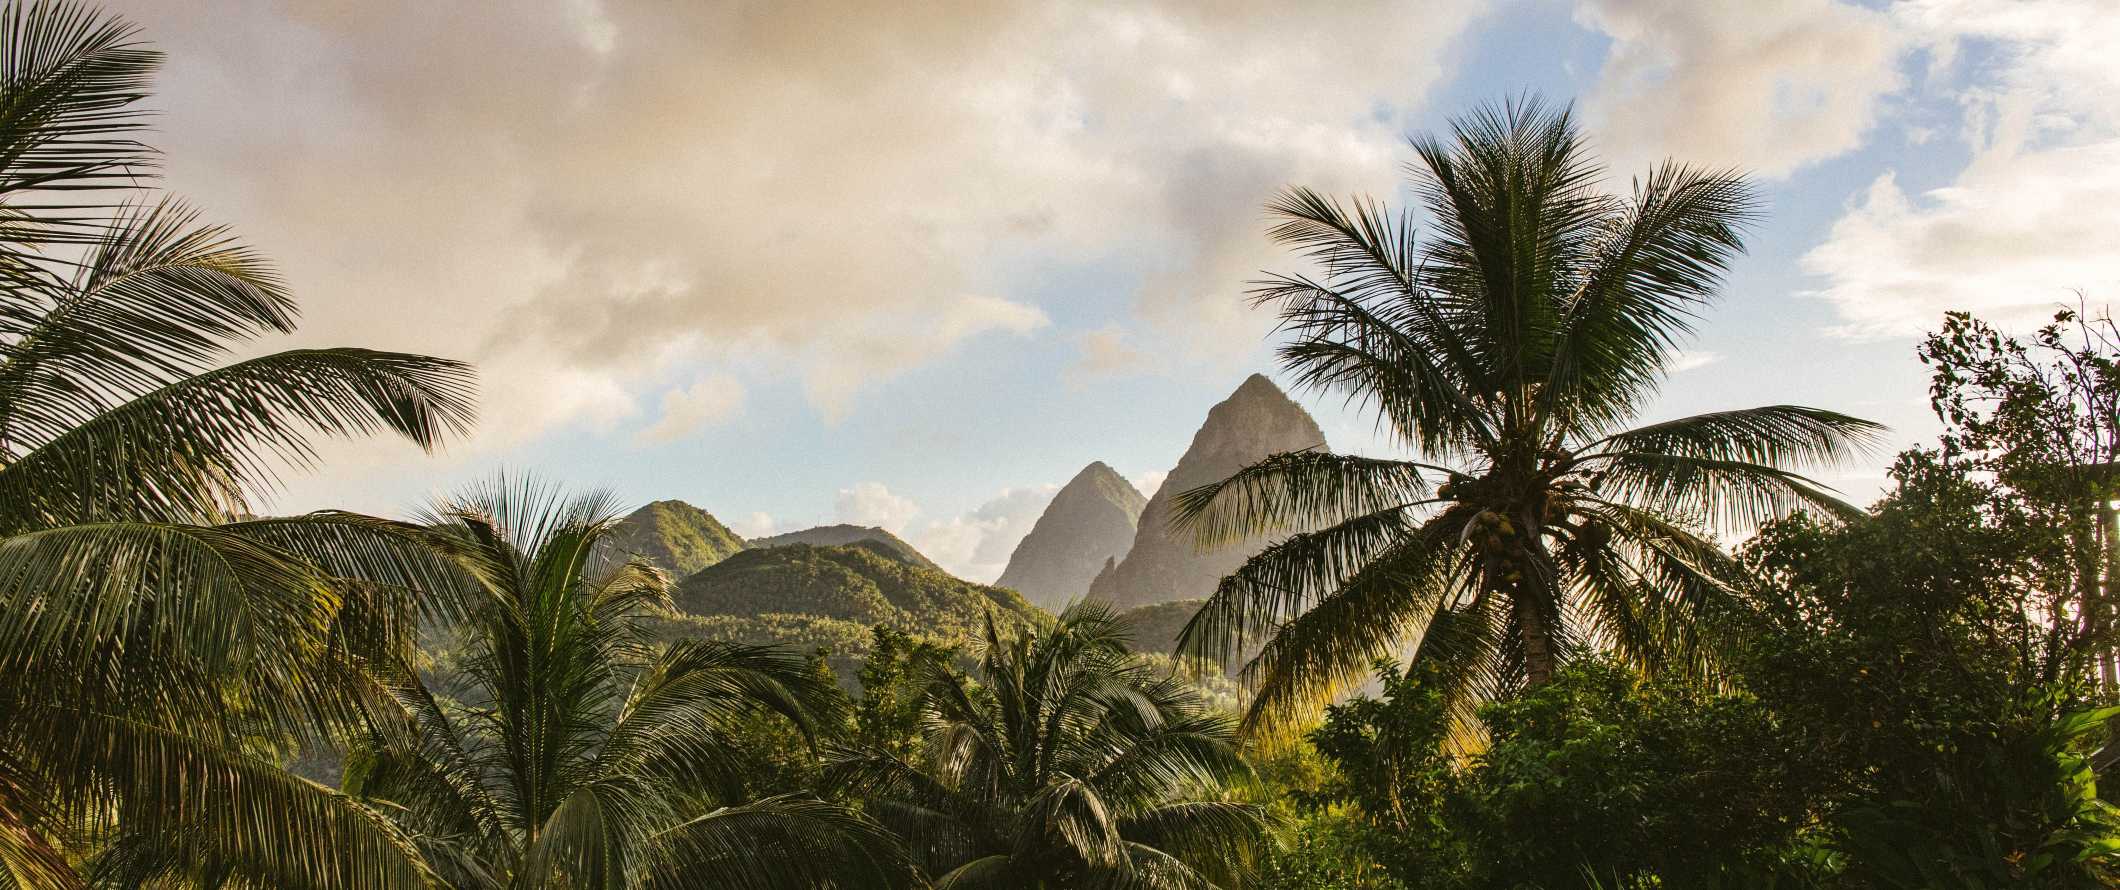 Palm trees and sharp peaks of mountains in the distance of the Caribbean island of Saint Lucia